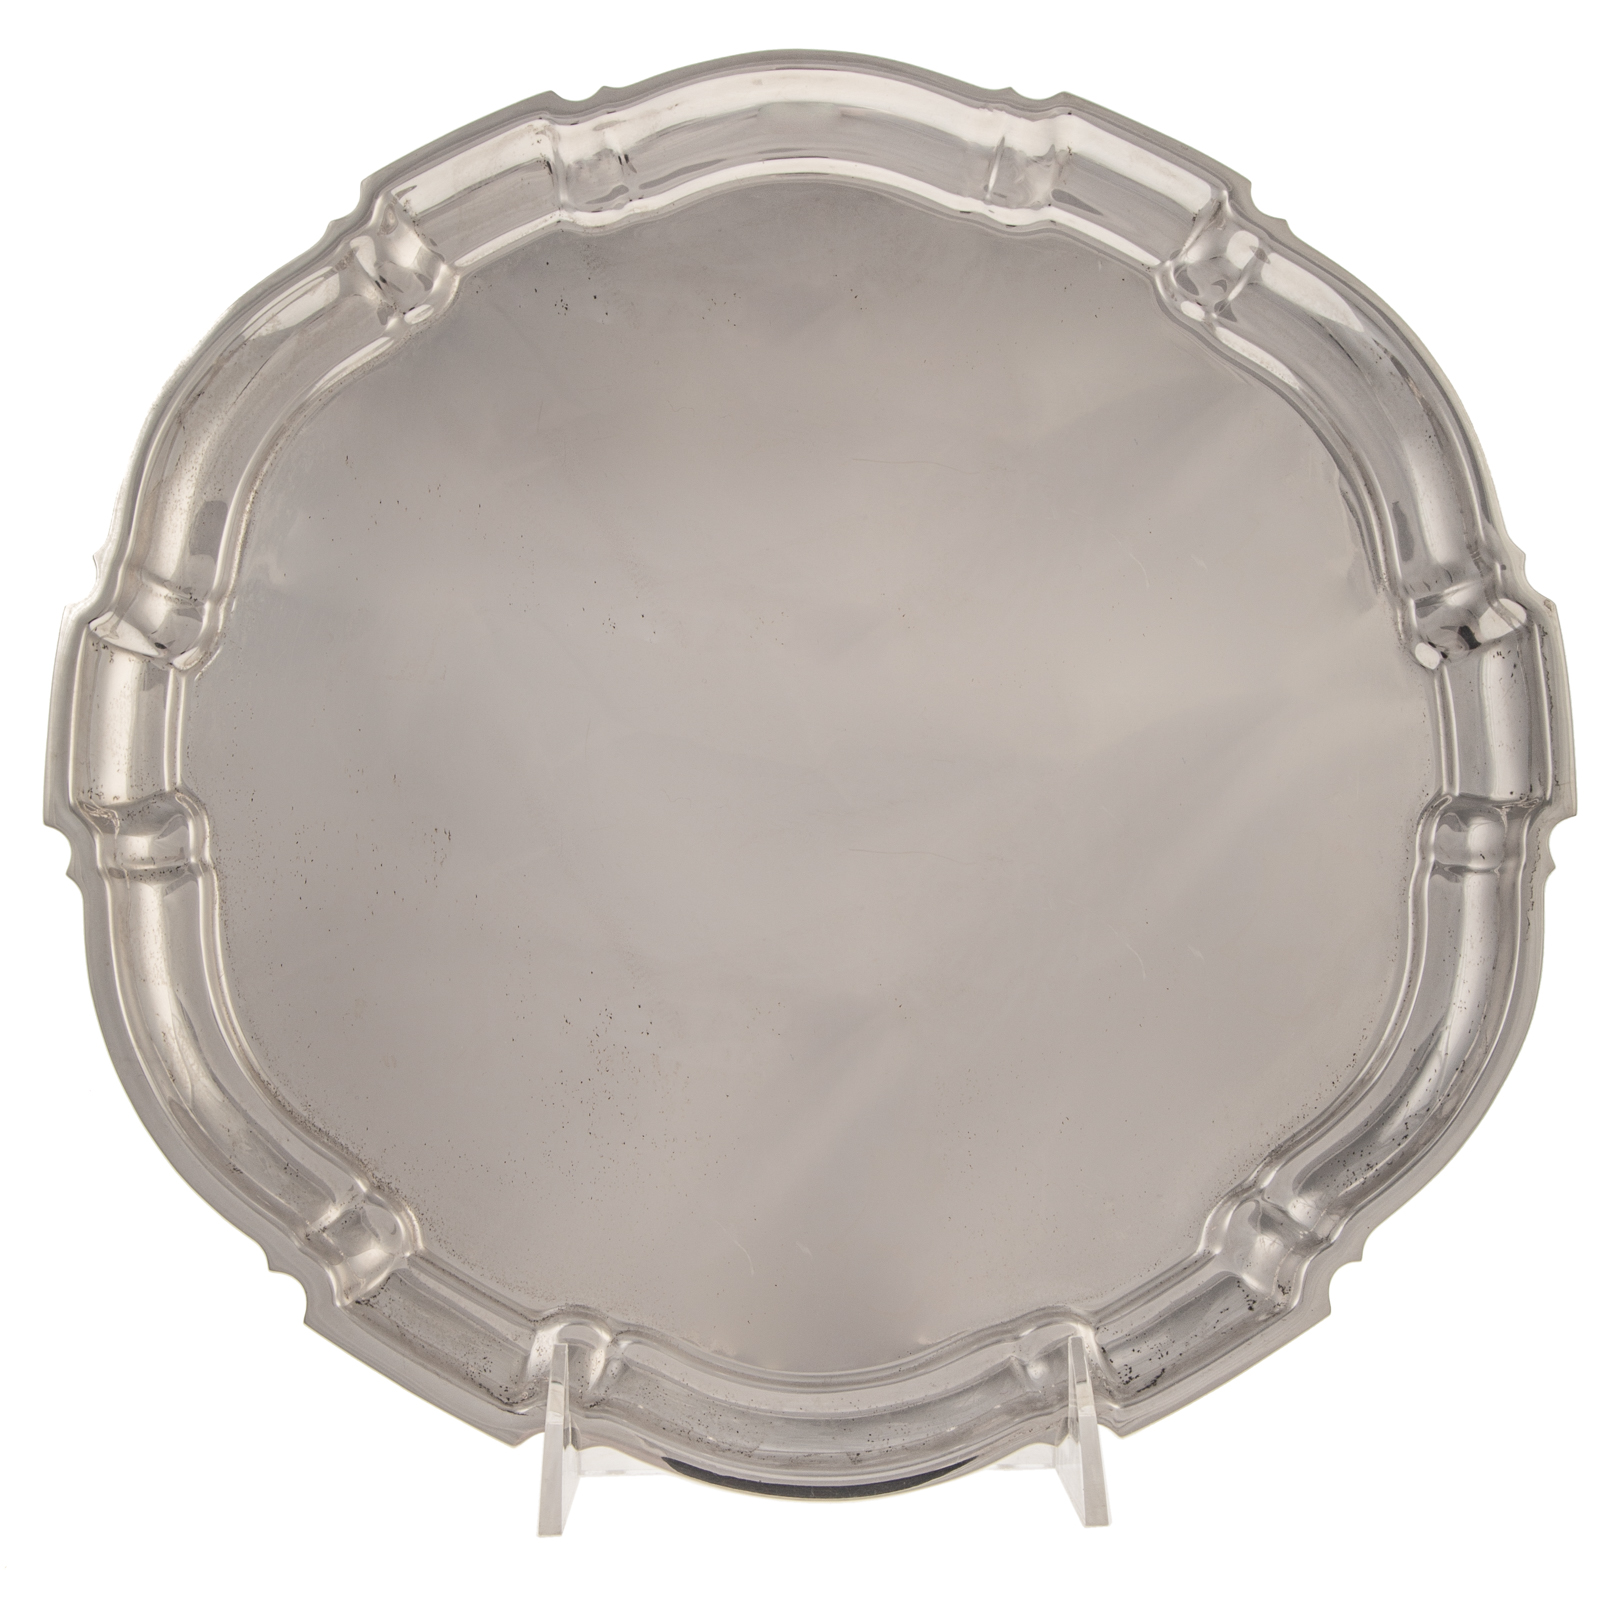 POOLE STERLING "CHIPPENDALE" TRAY